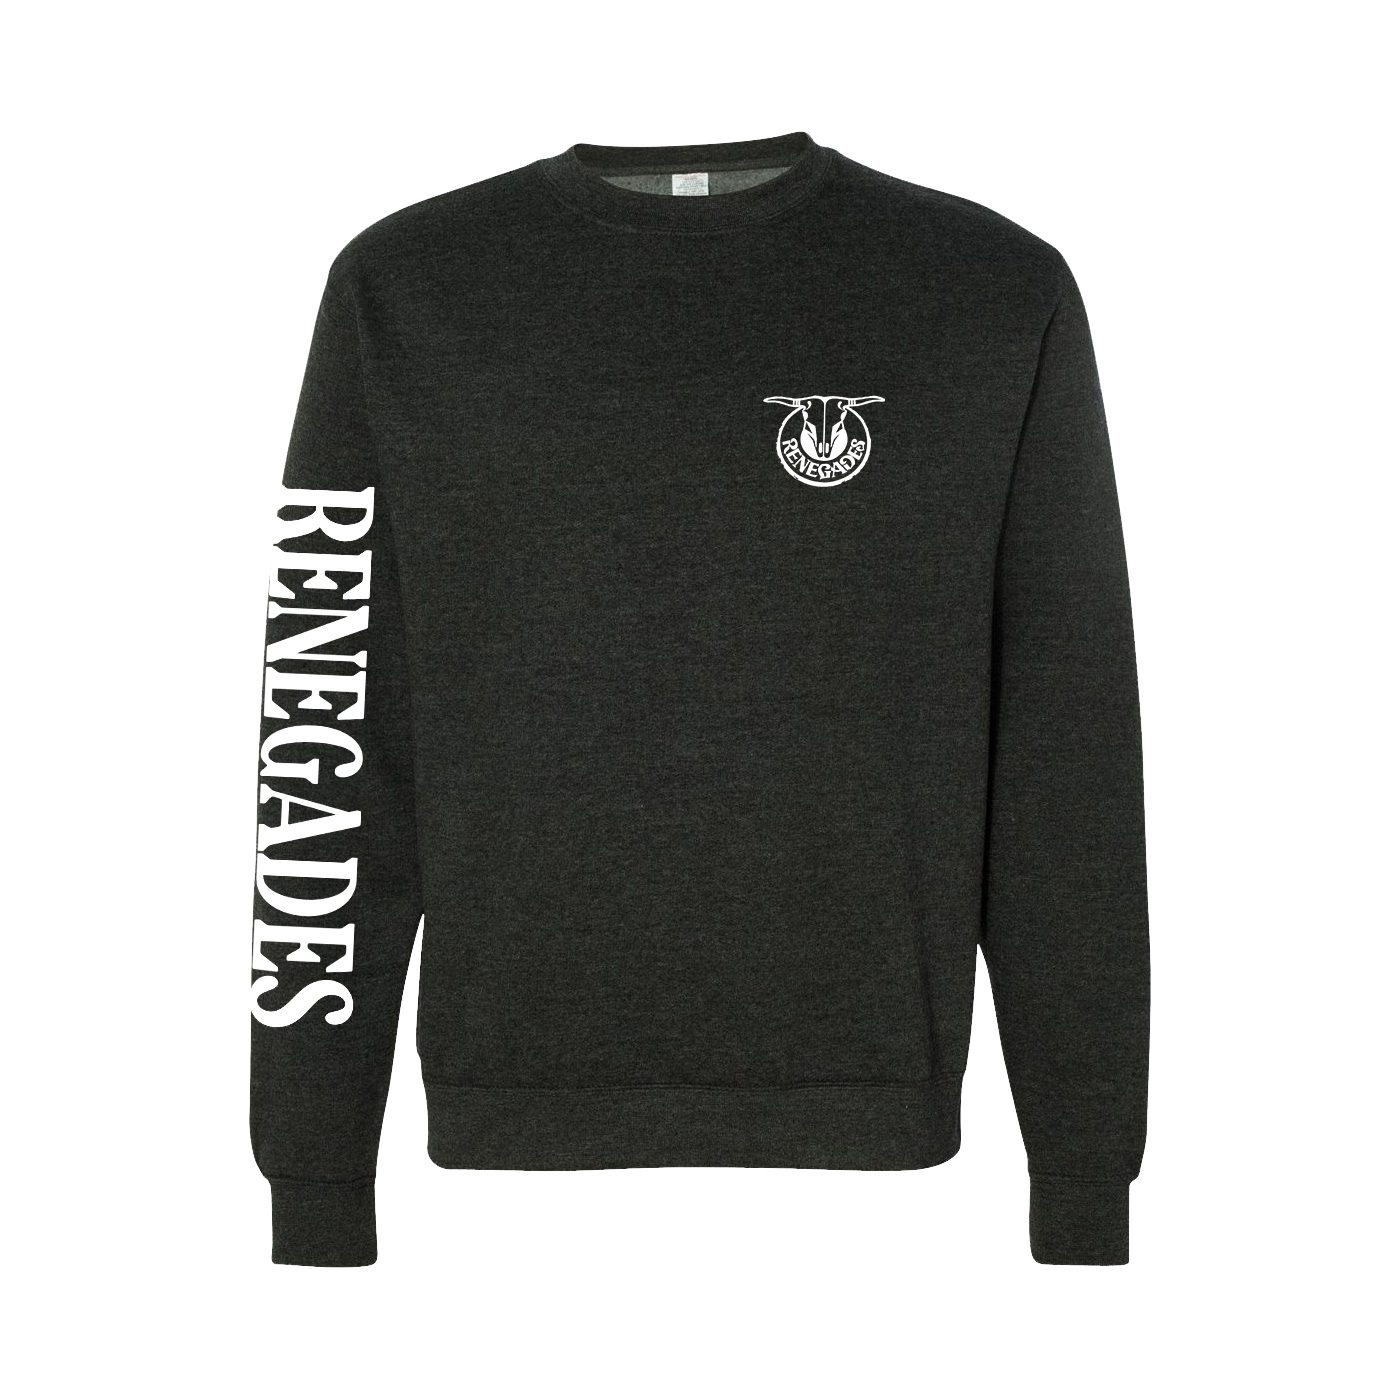 Charcoal Crew Neck with White